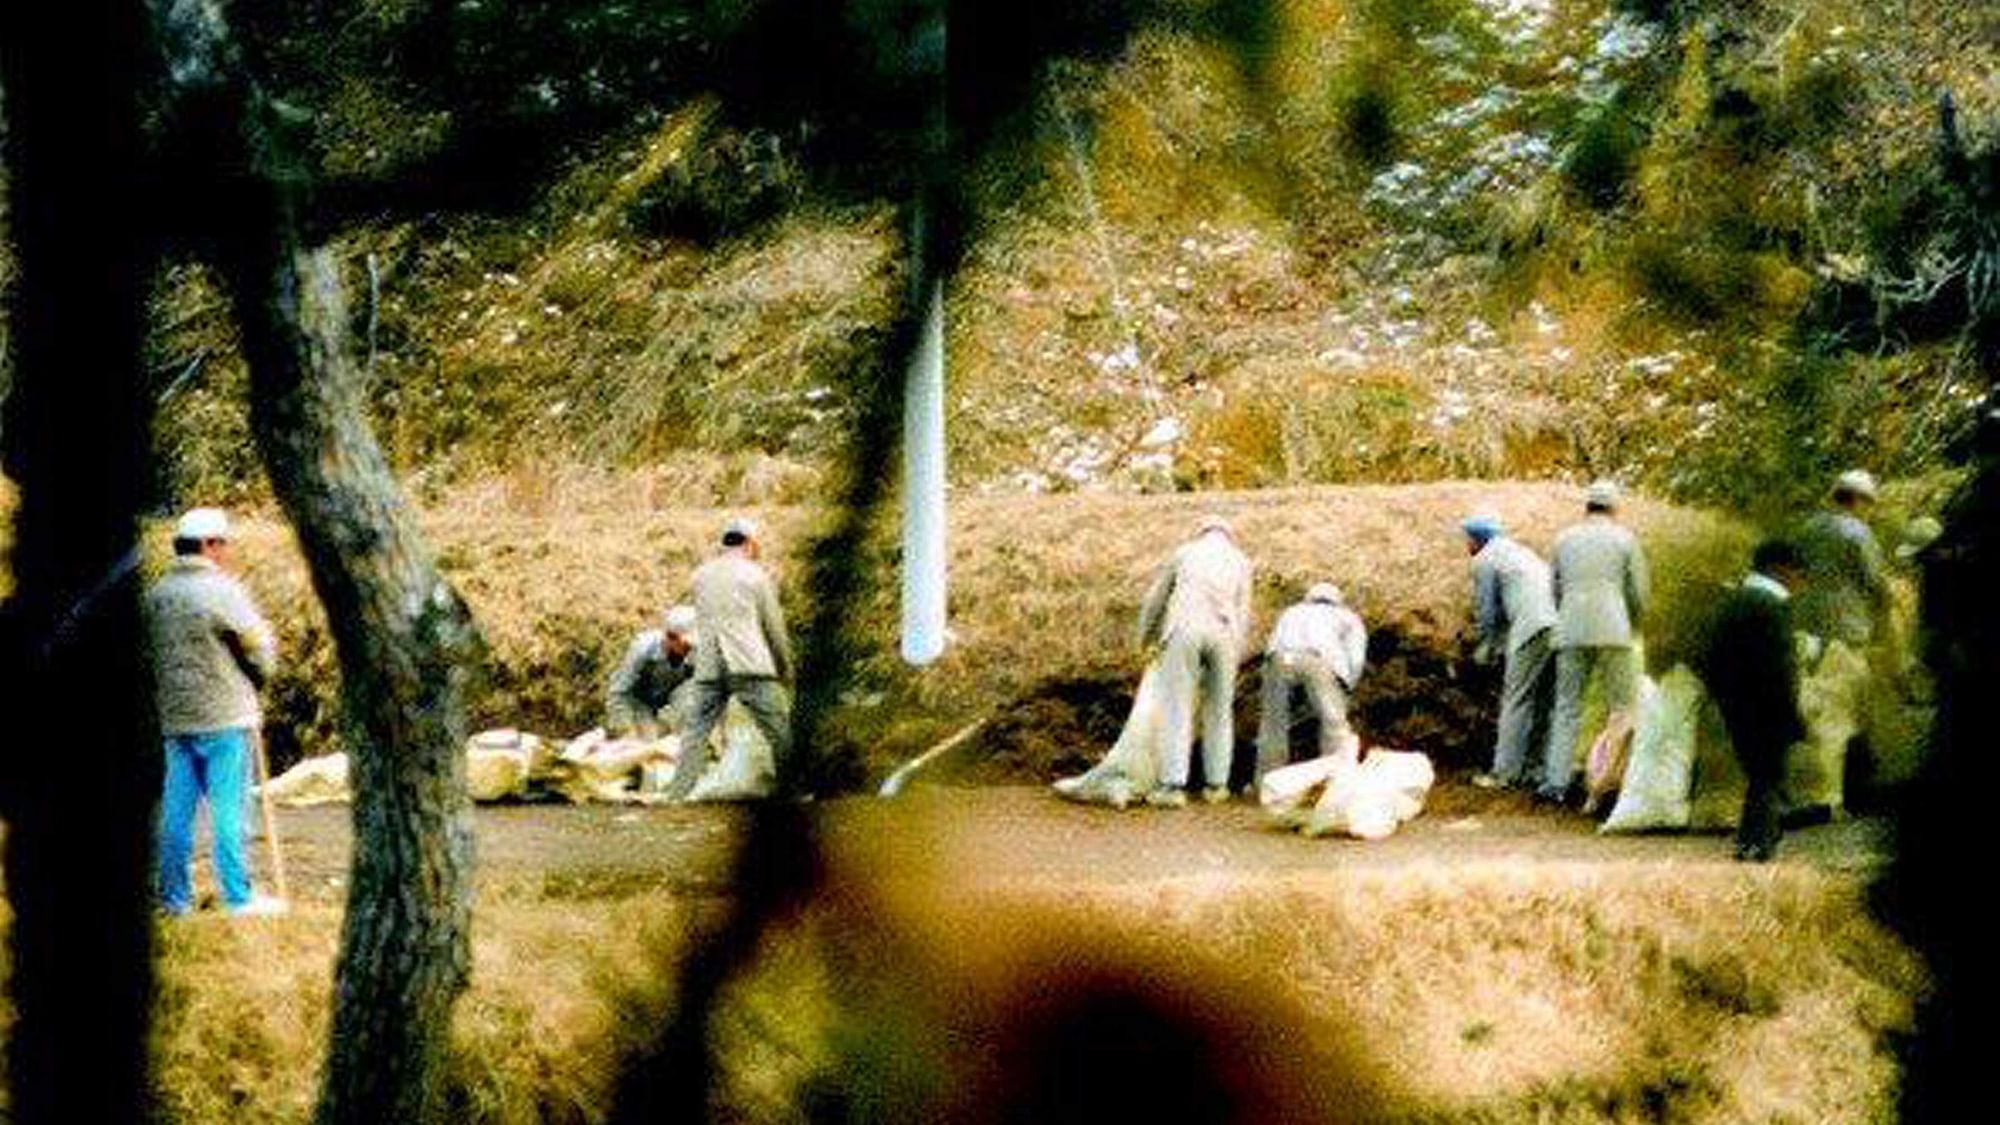 In this December 1986 photo provided by the Ulsan District Prosector’s Office, Brothers Home inmates work at a construction site in Ulsan, South Korea. (Photo: AP)